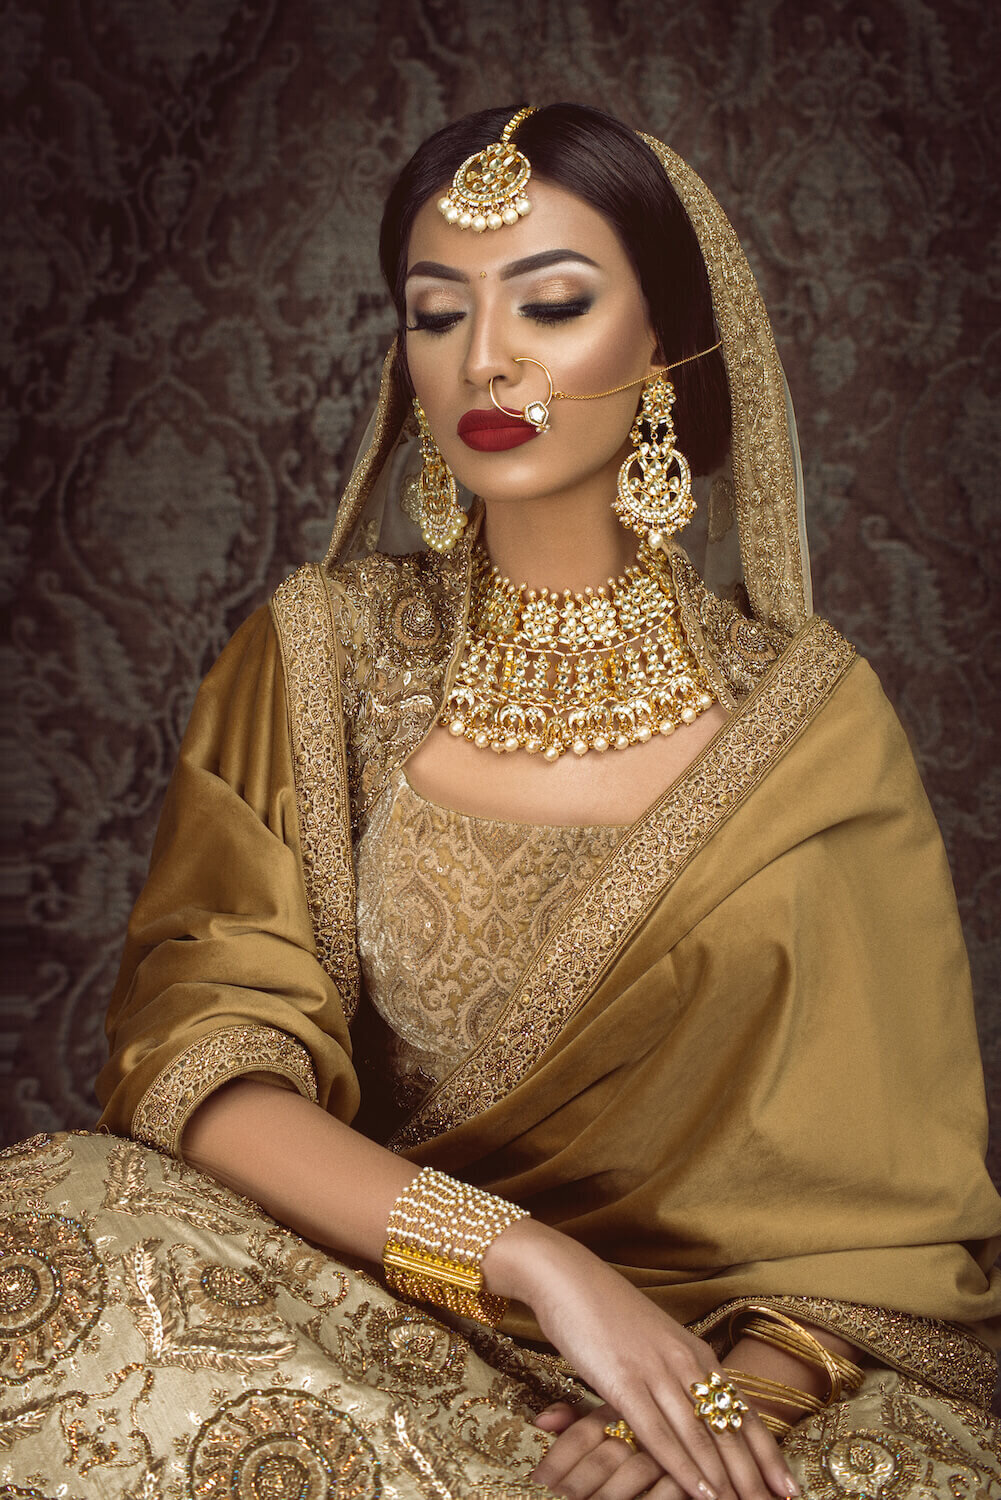 Stunning bride wearing a beautiful outfit and jewellery